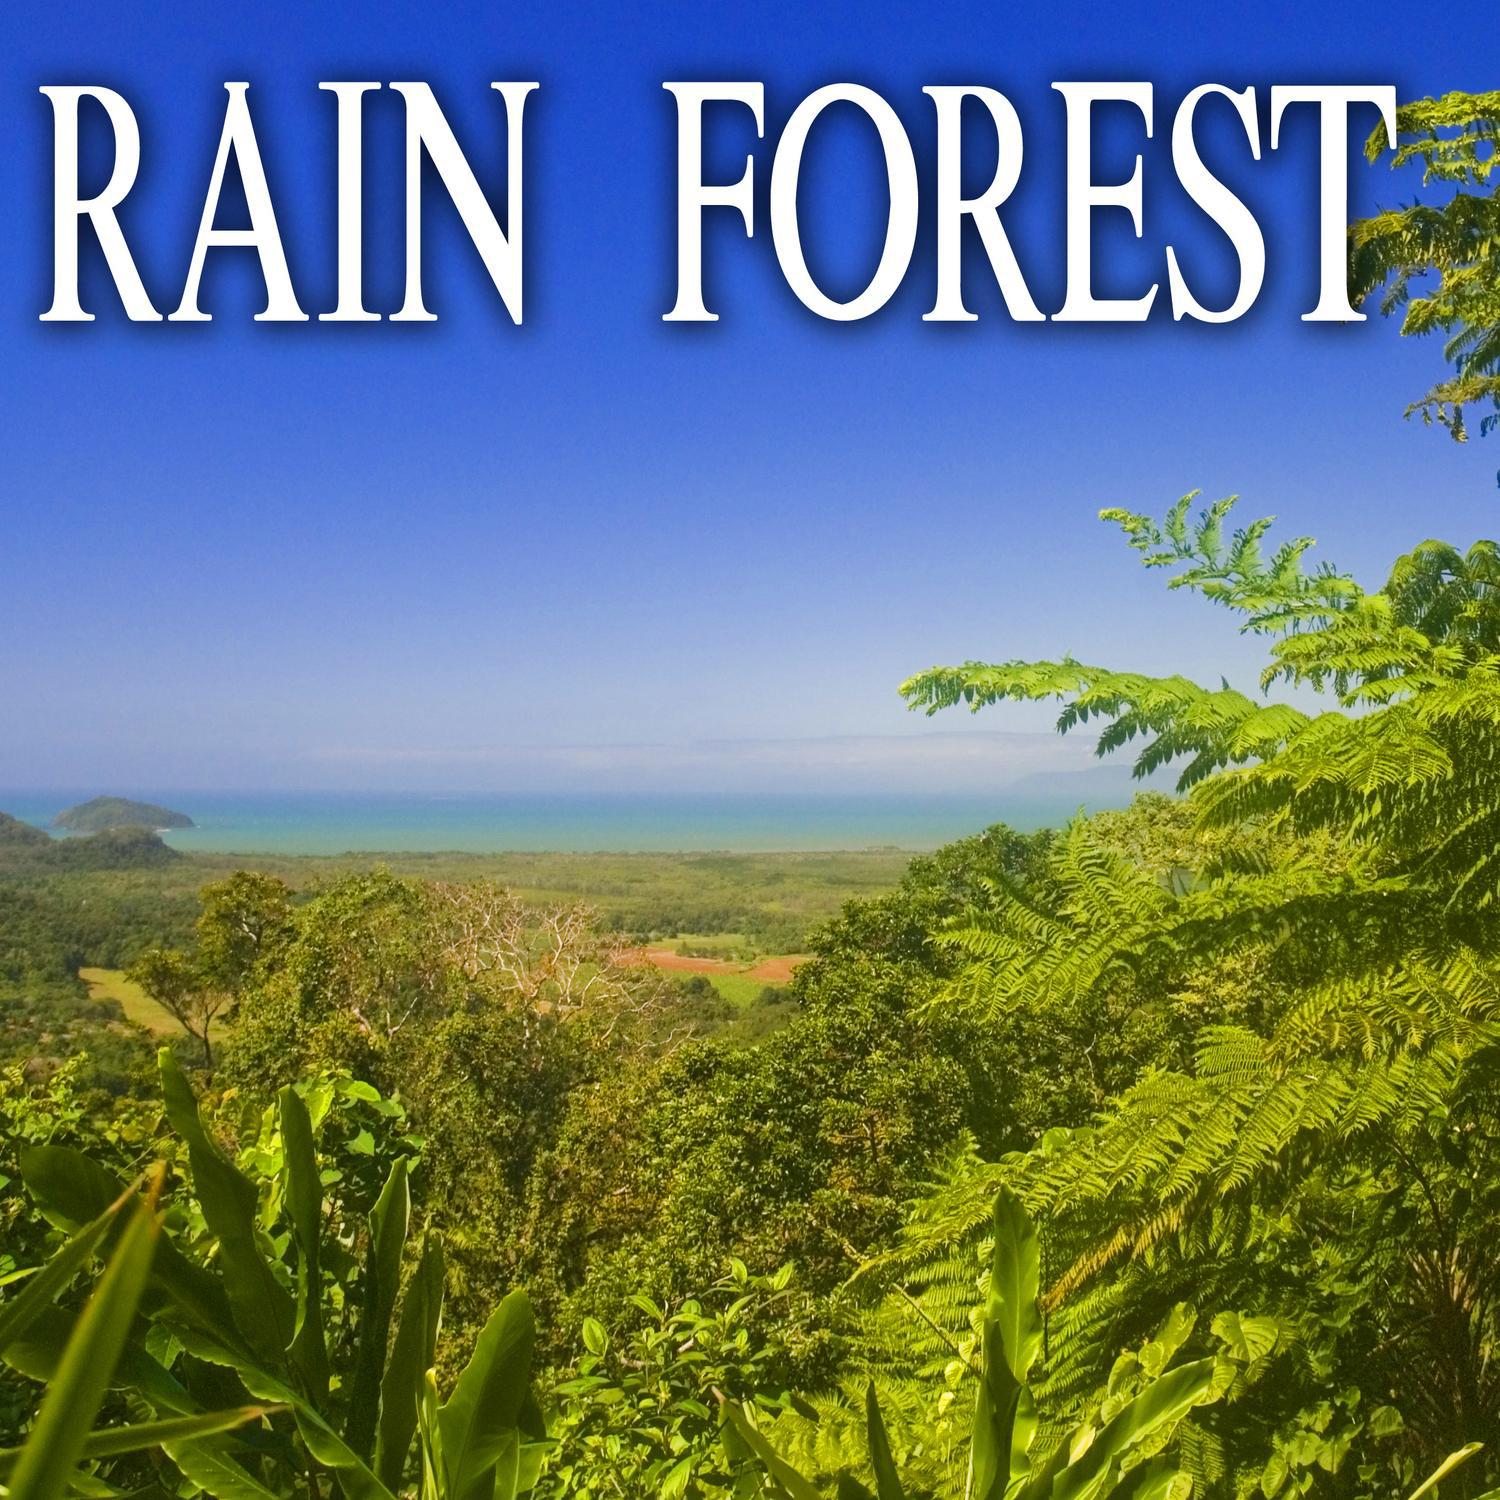 Daytime Rainforest Environment with Close and Distant Birds